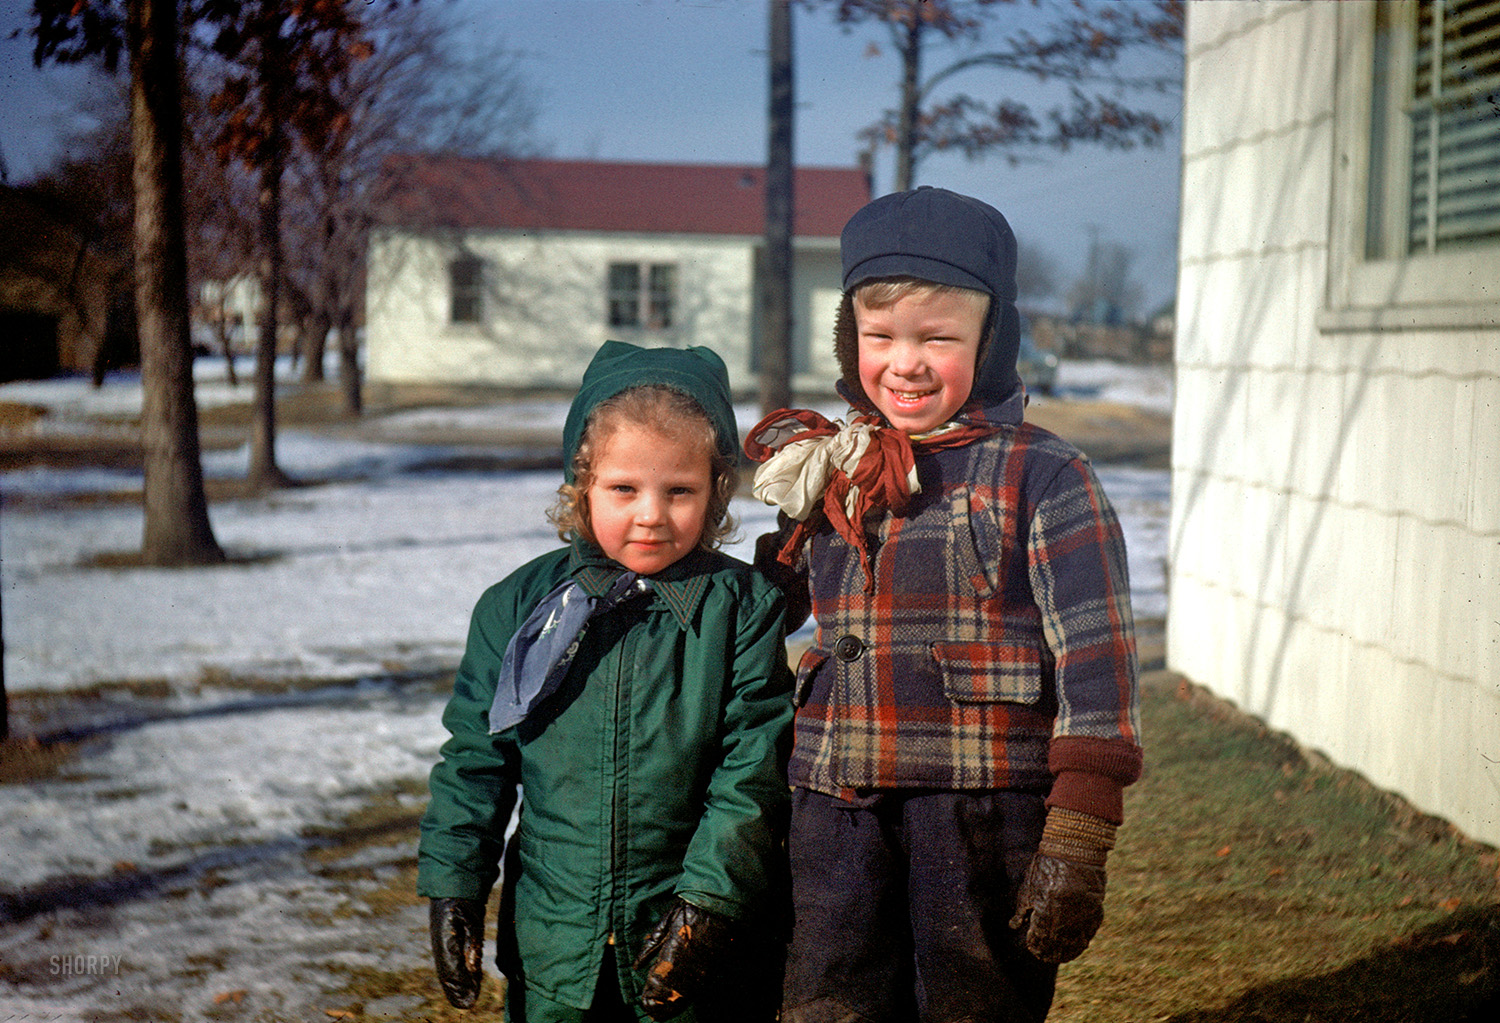 "Winter 1951-52." Our young man has a flair for fashion, and a way with the ladies. Fourth in this series of found slides. 35mm Kodachrome. View full size.